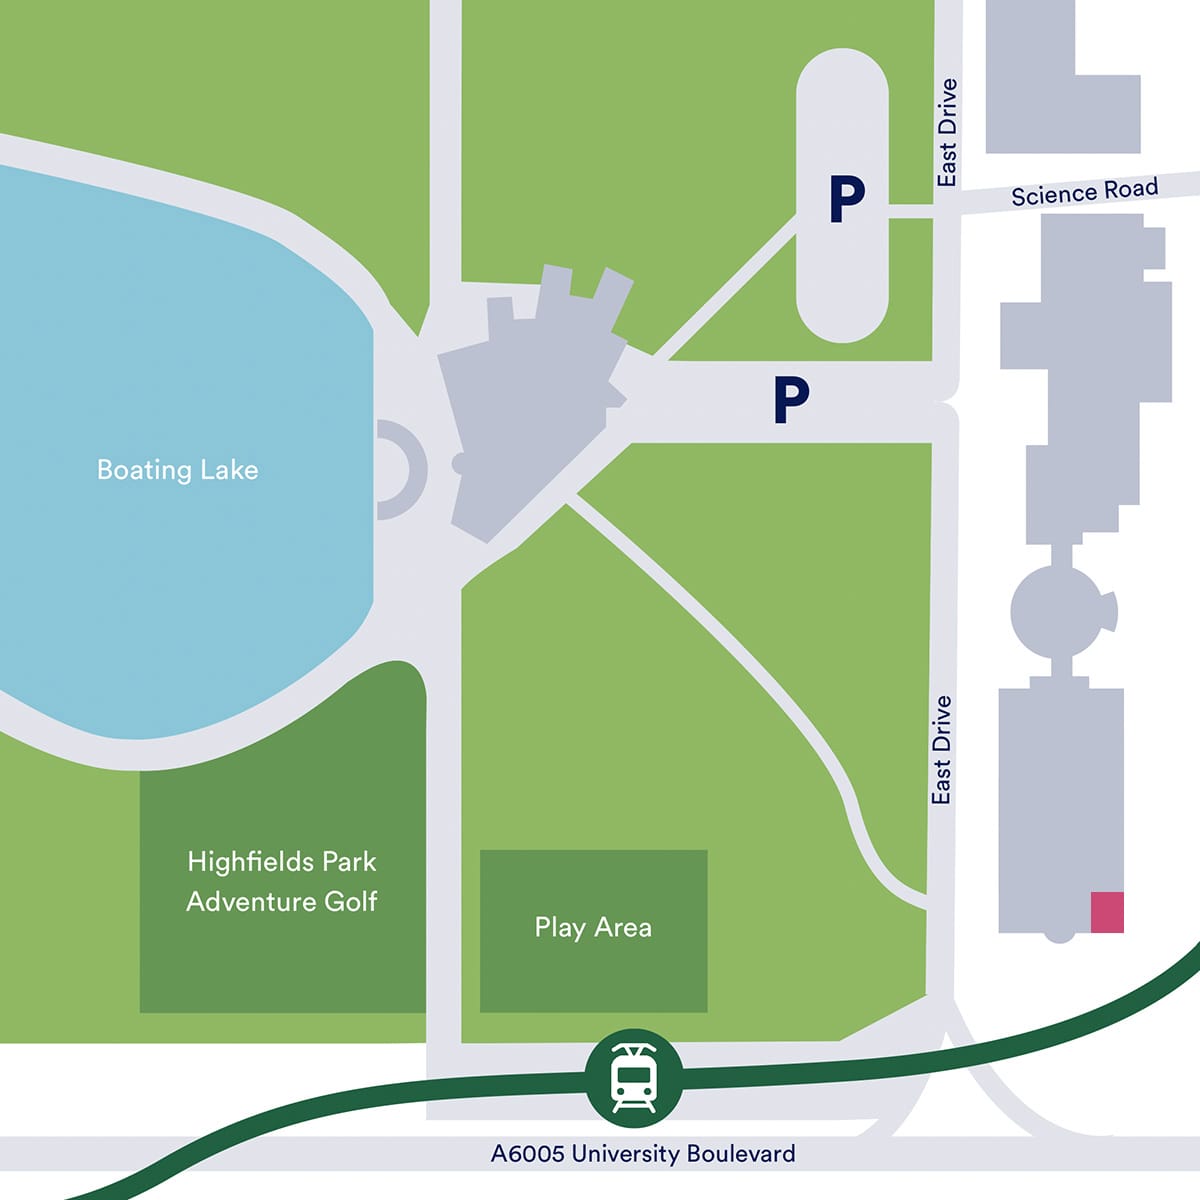 A map showing where the Learning Studio is located in relation to Lakeside Arts' buildings and the surrounding parkland.